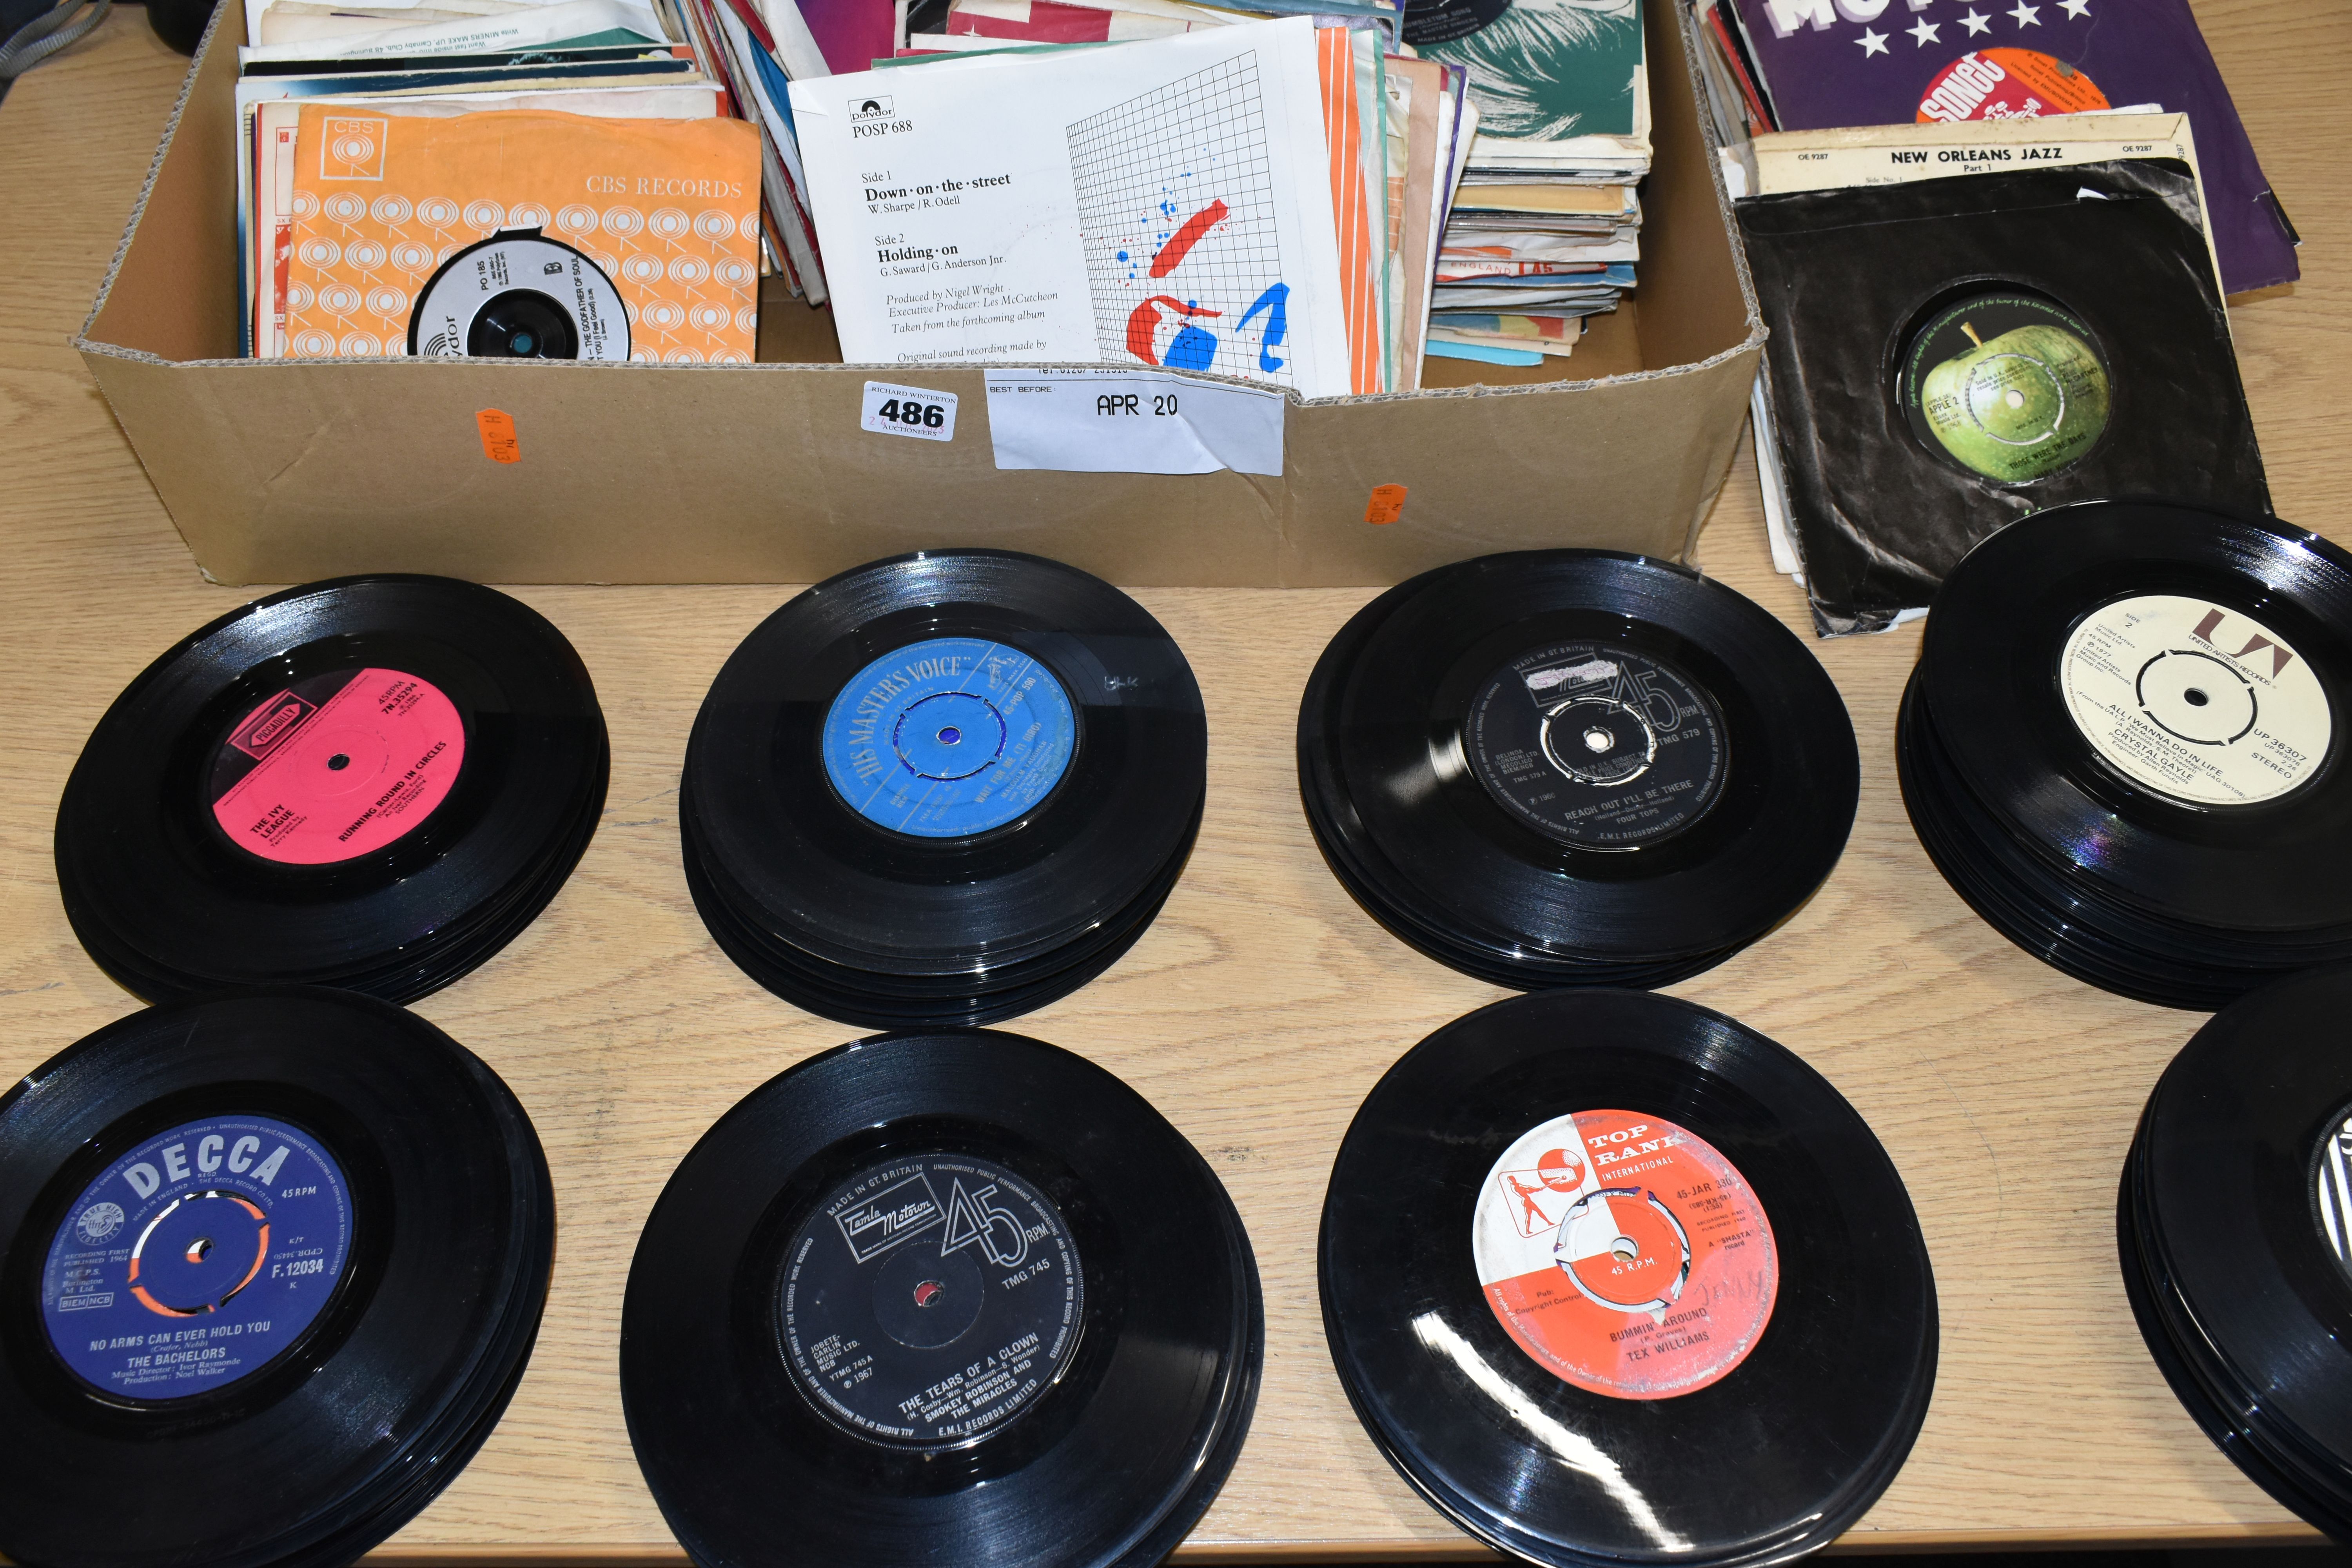 ONE BOX OF SINGLE 45RPM RECORDS, over two hundred single 45rpm records, a collection spanning from